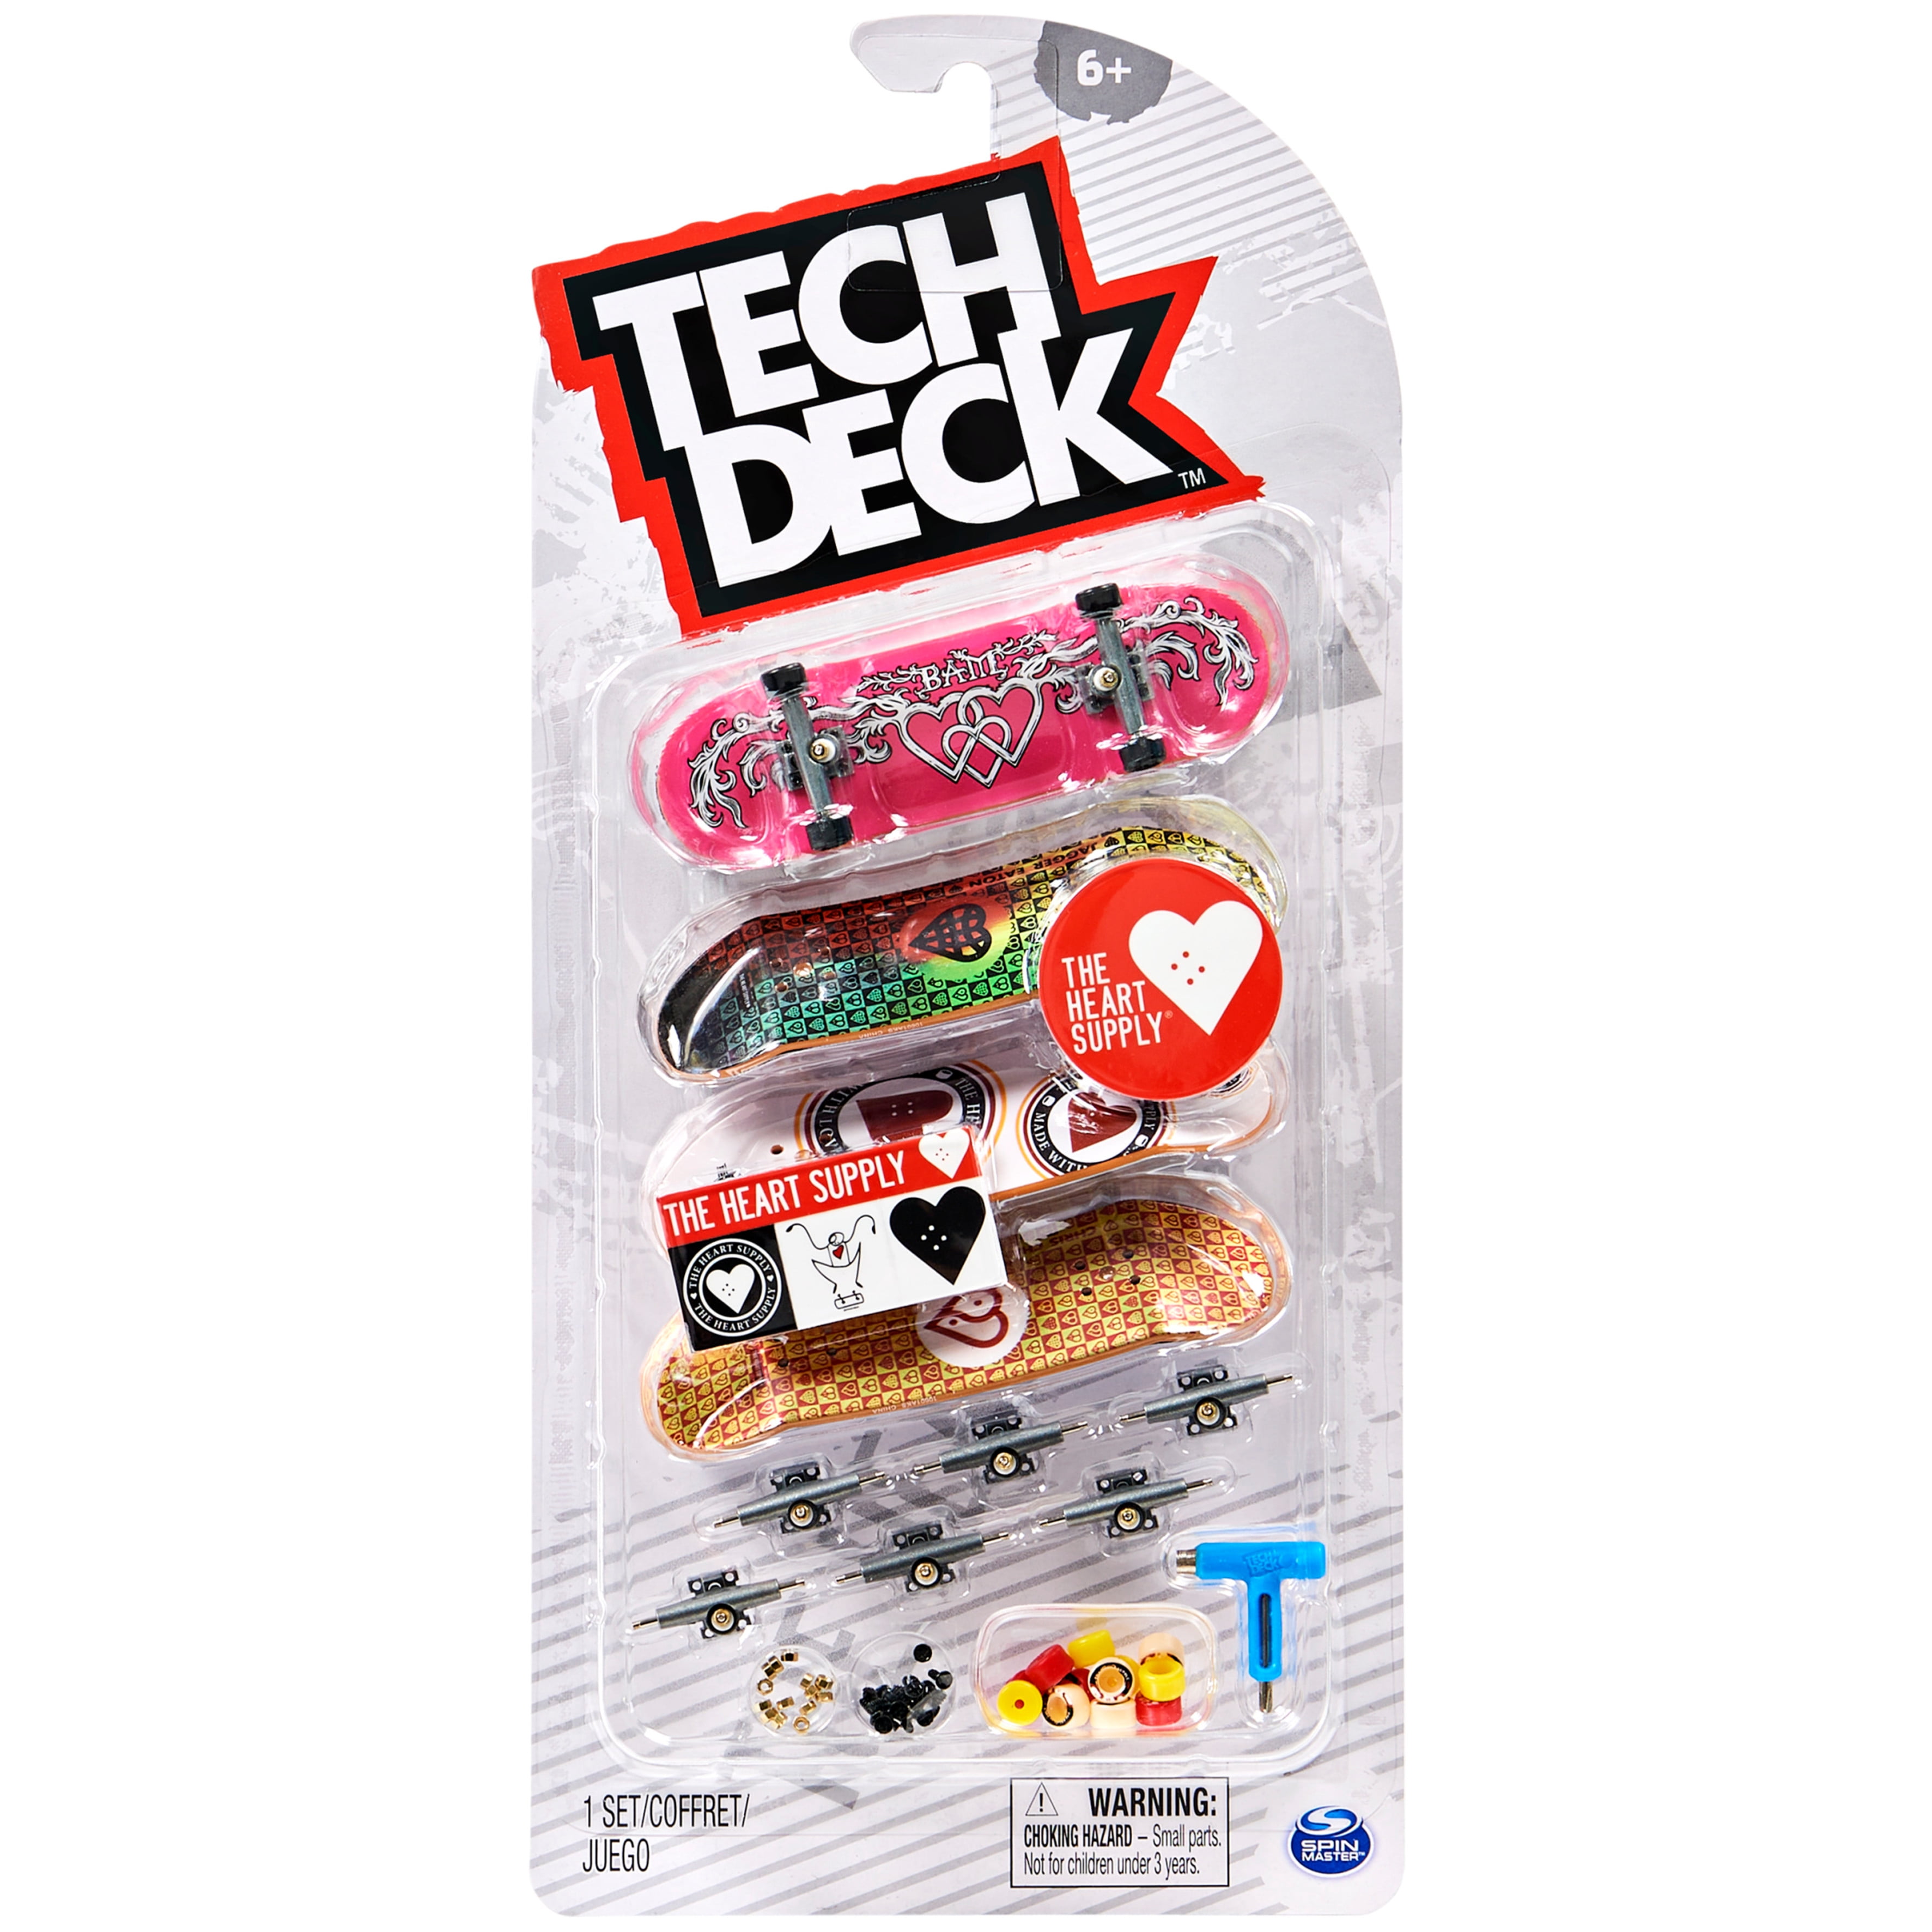 LIMITED EDITION Assorted Shipping/Volume Discounts Tech Deck Sk8shop,Ultra DLX 